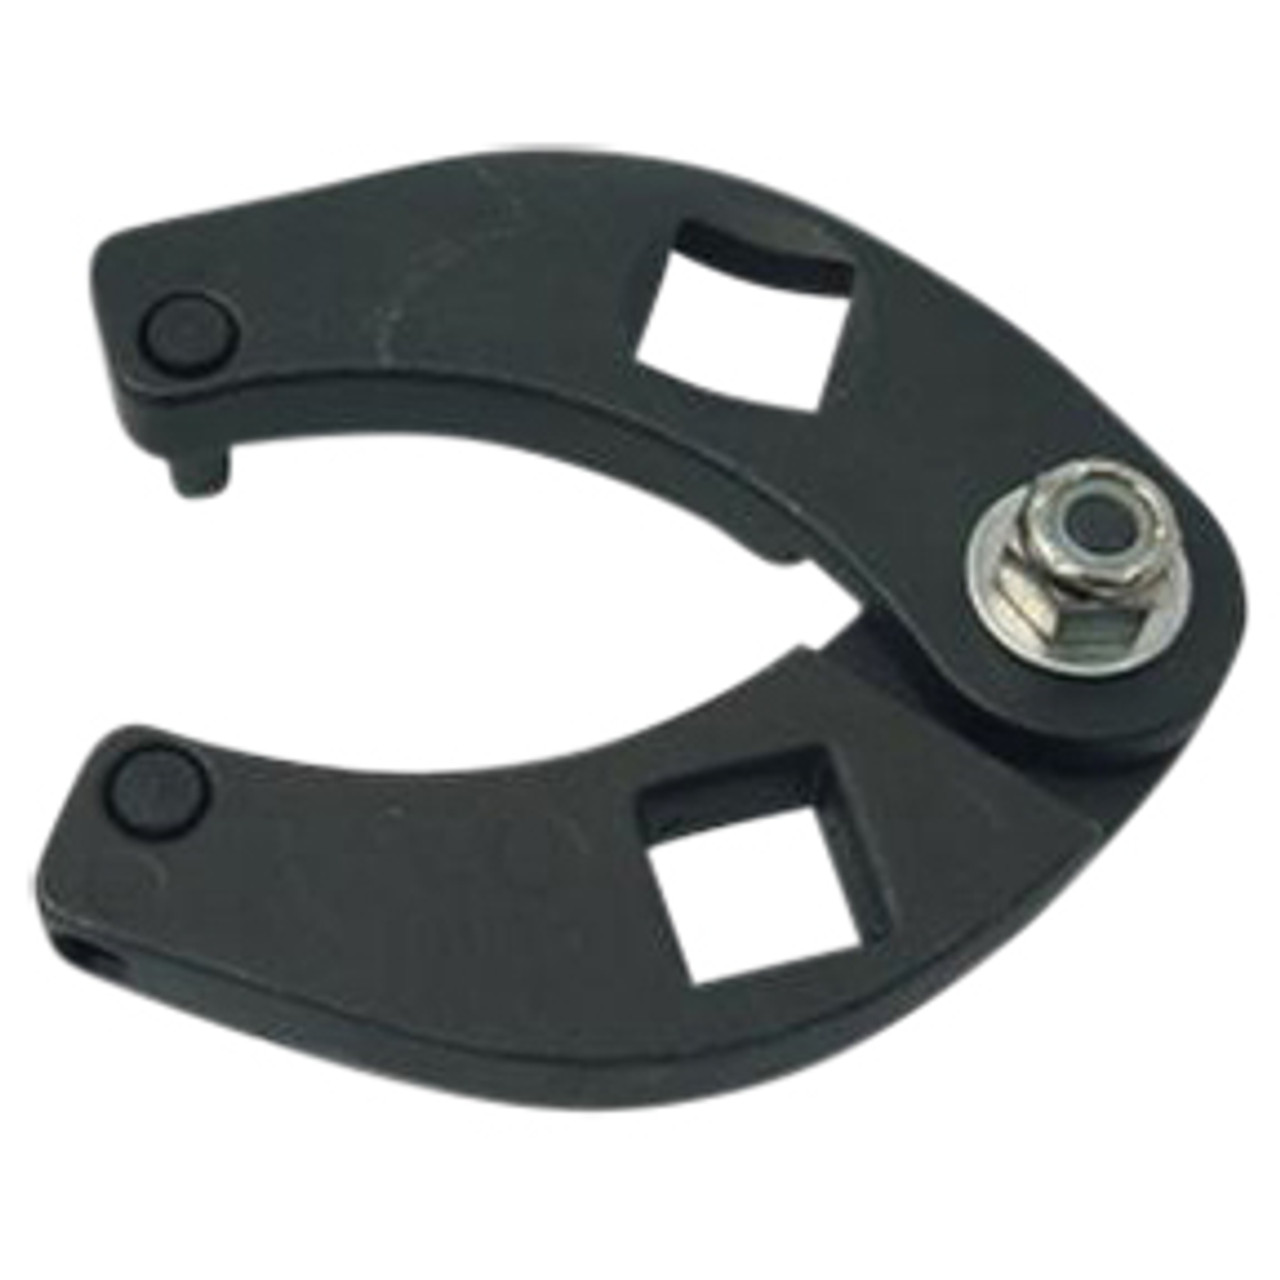 Small Adjustable Gland Nut Wrench